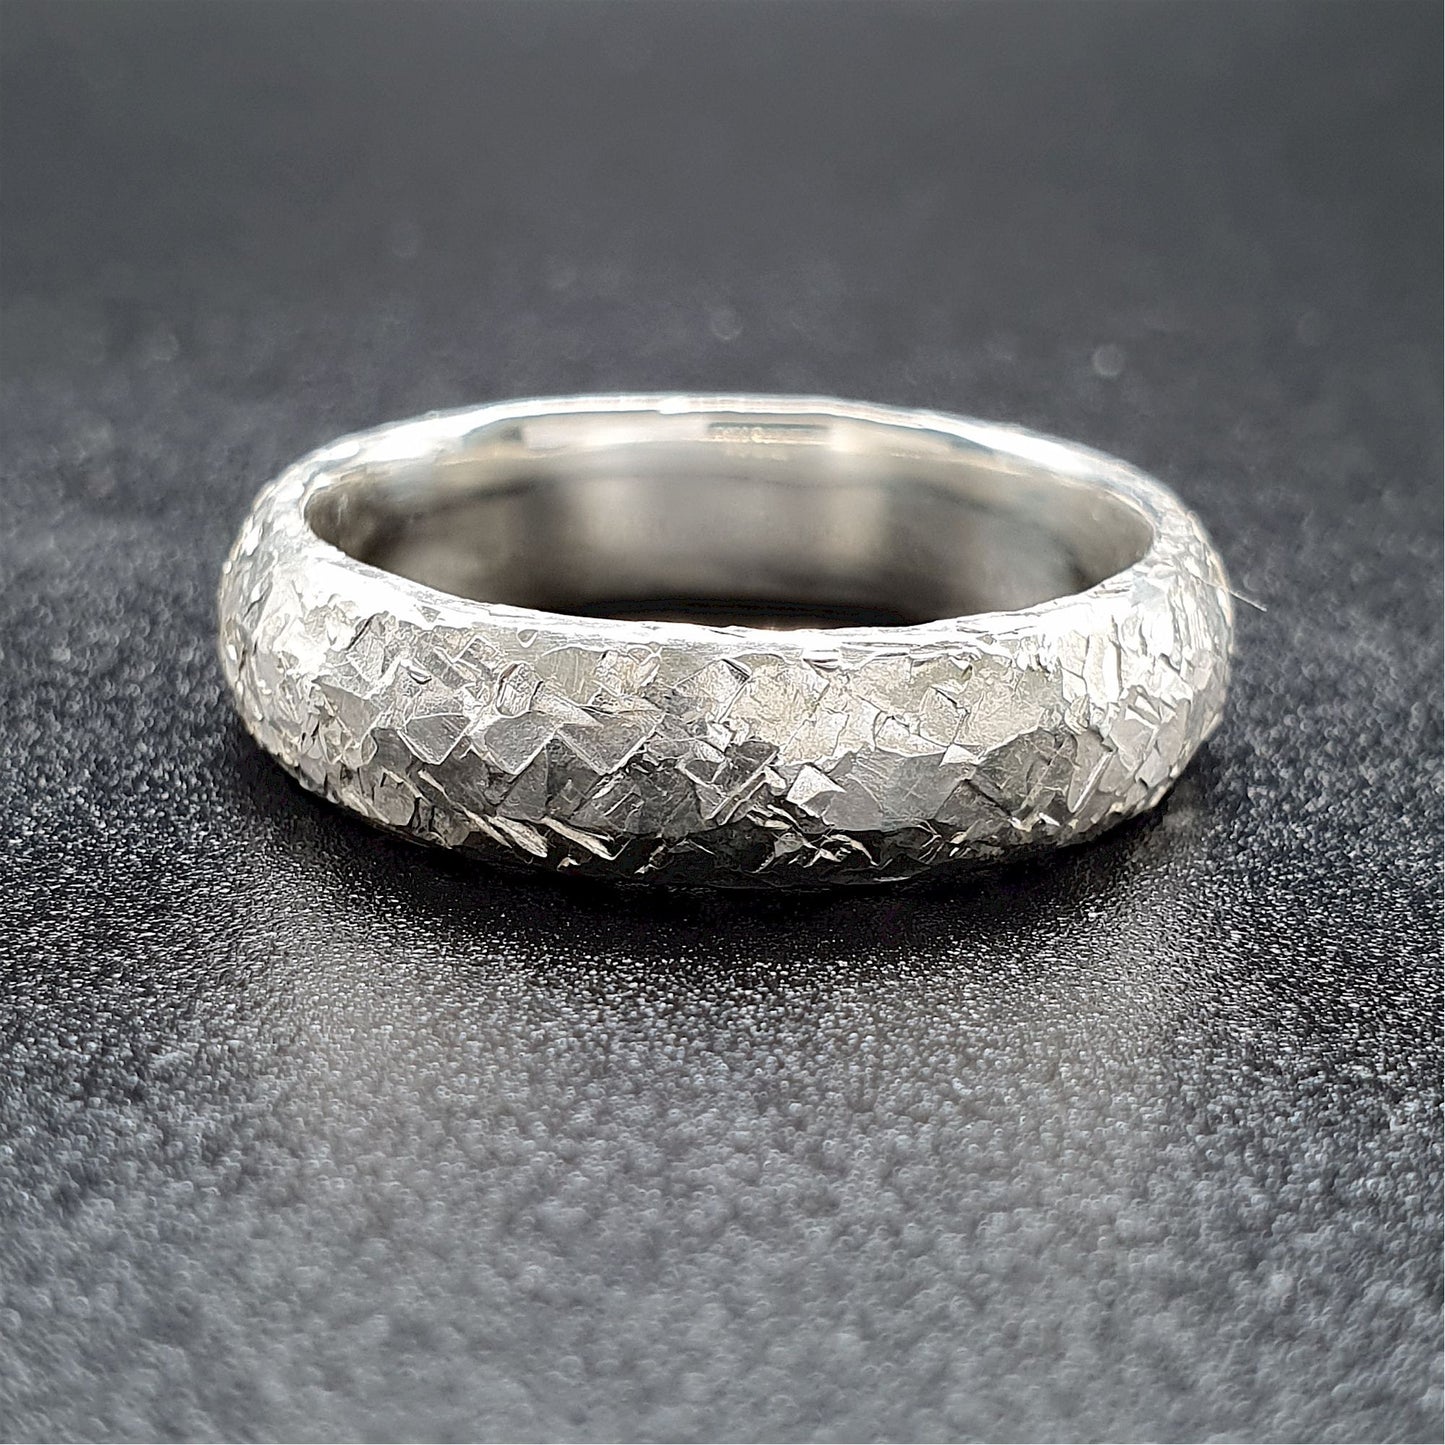 Wedding ring, broad white gold Fire hammered design Designer Wedding Rings Wedding Ring 